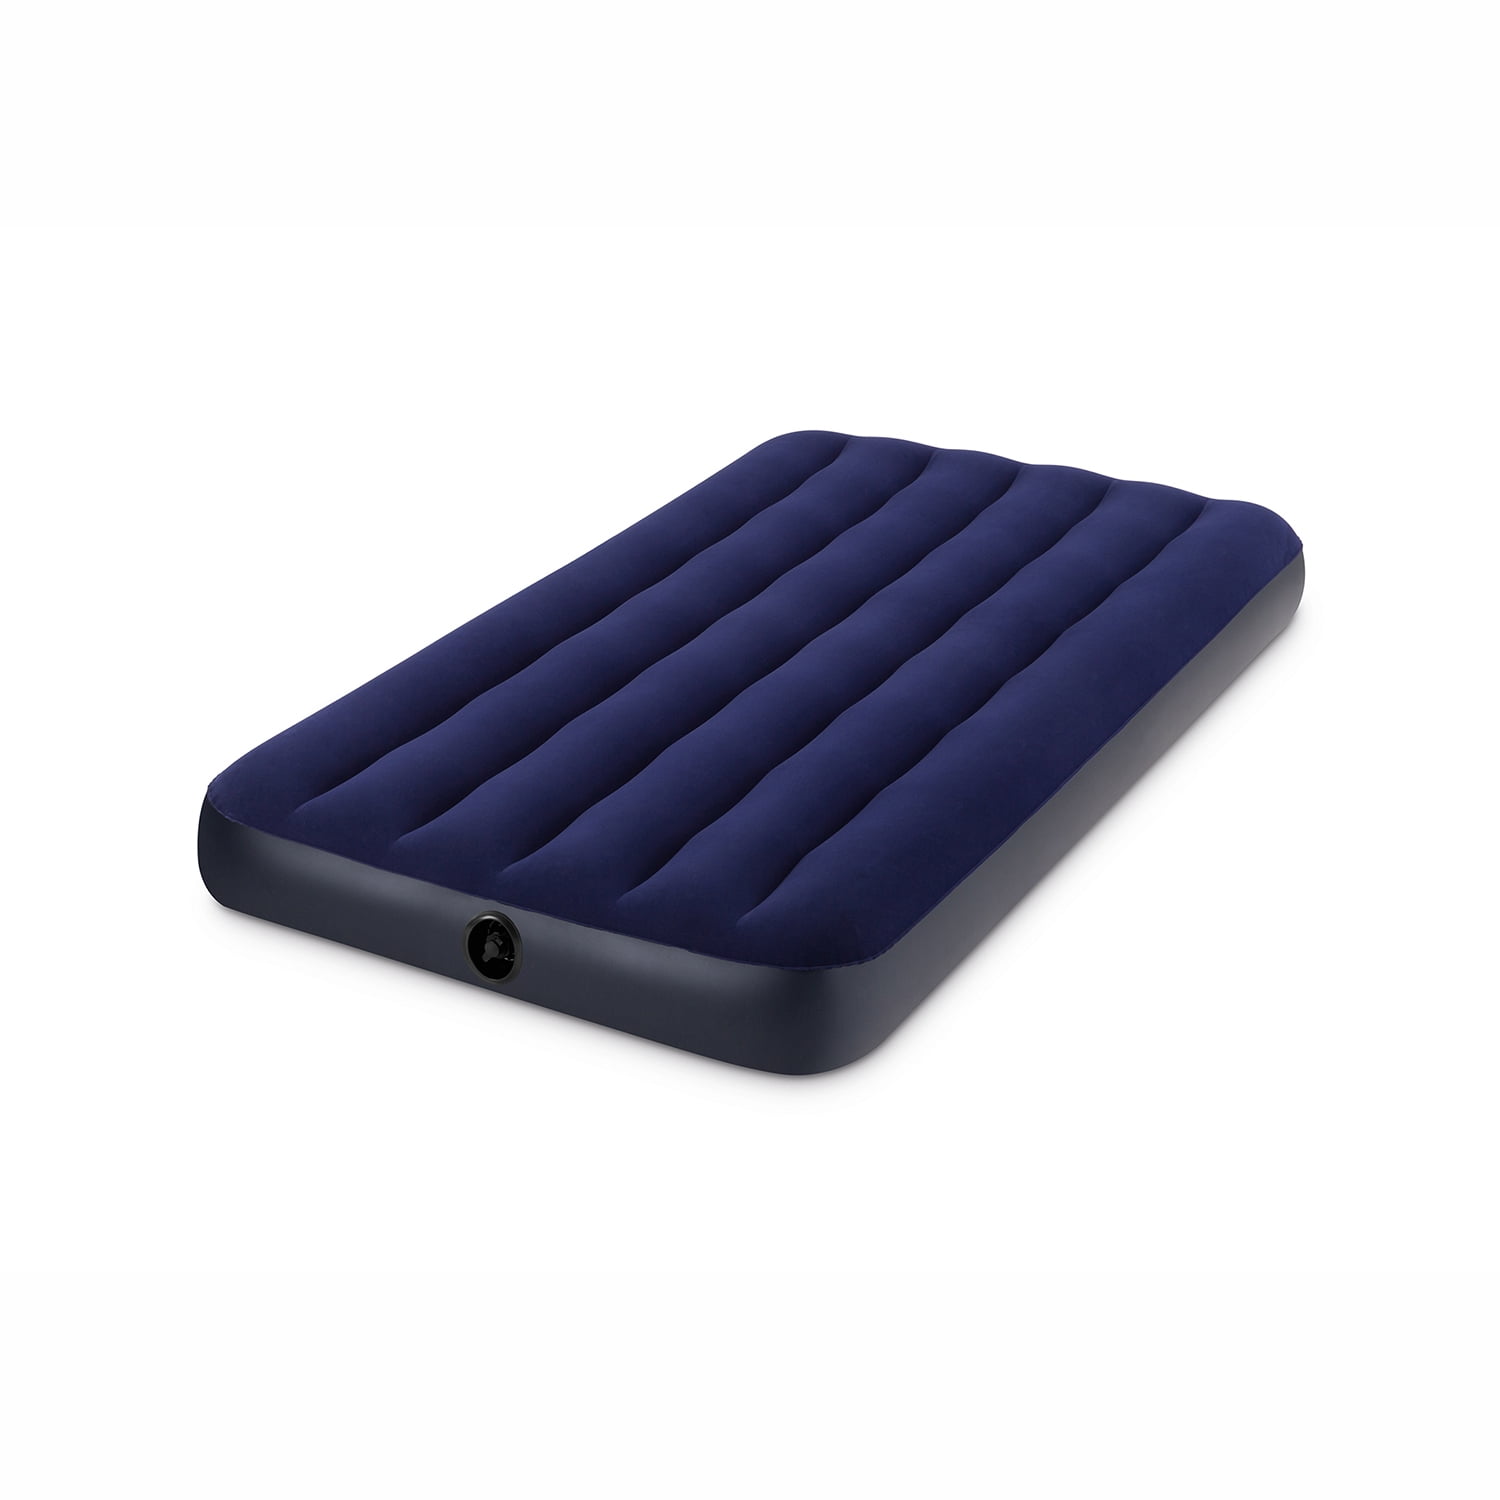 Intex Inflatable Airbed Camping Mattress Twin Size Thin Air Bed Sleeping Folding